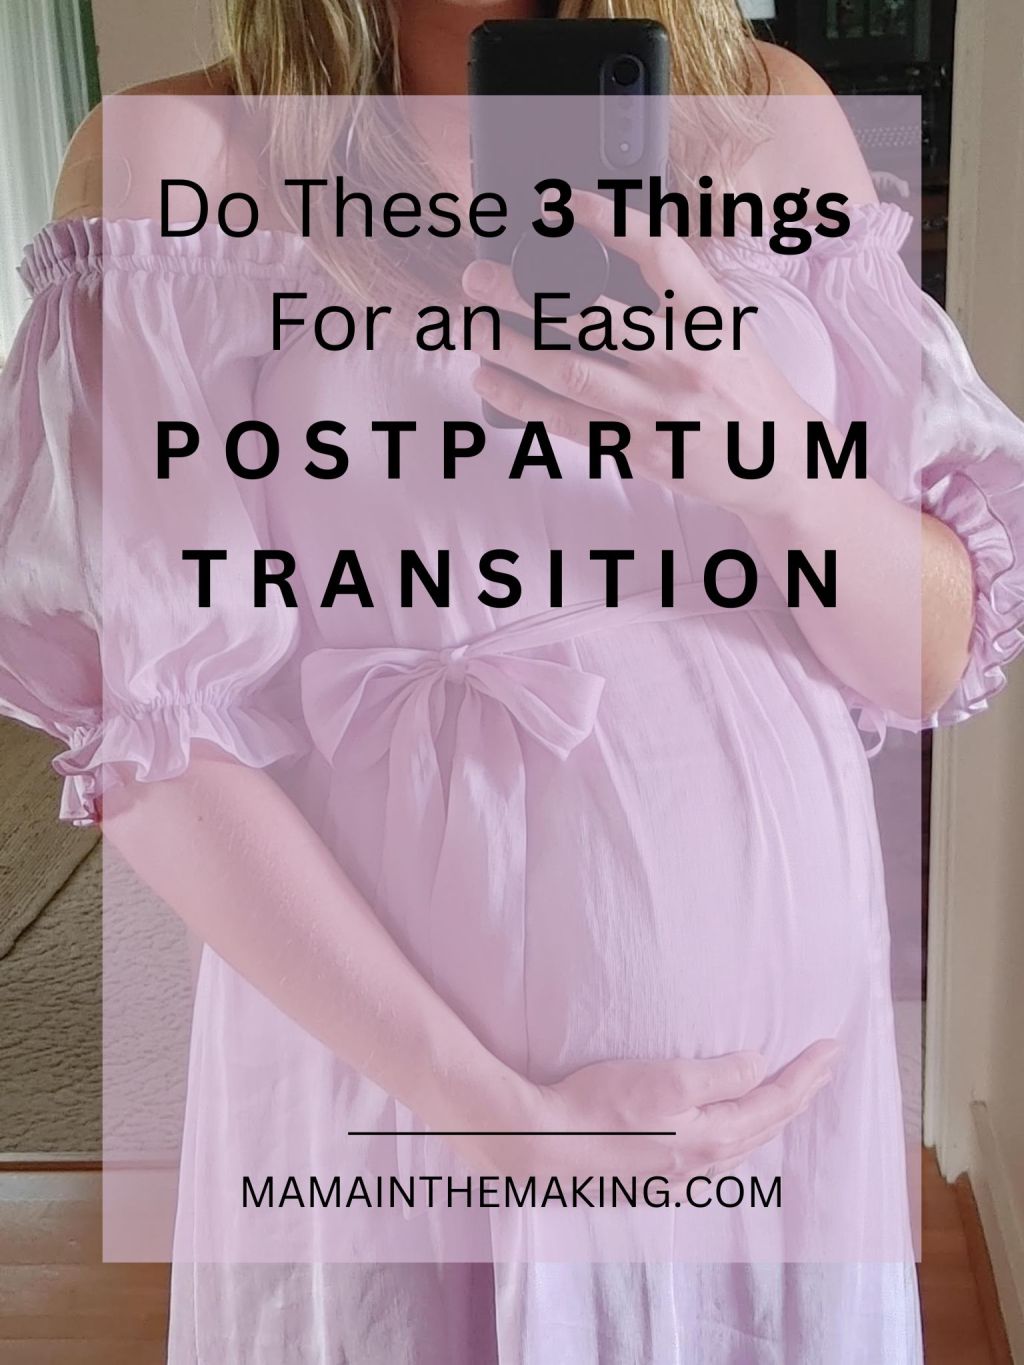 Do These 3 Things for an Easier Postpartum Transition